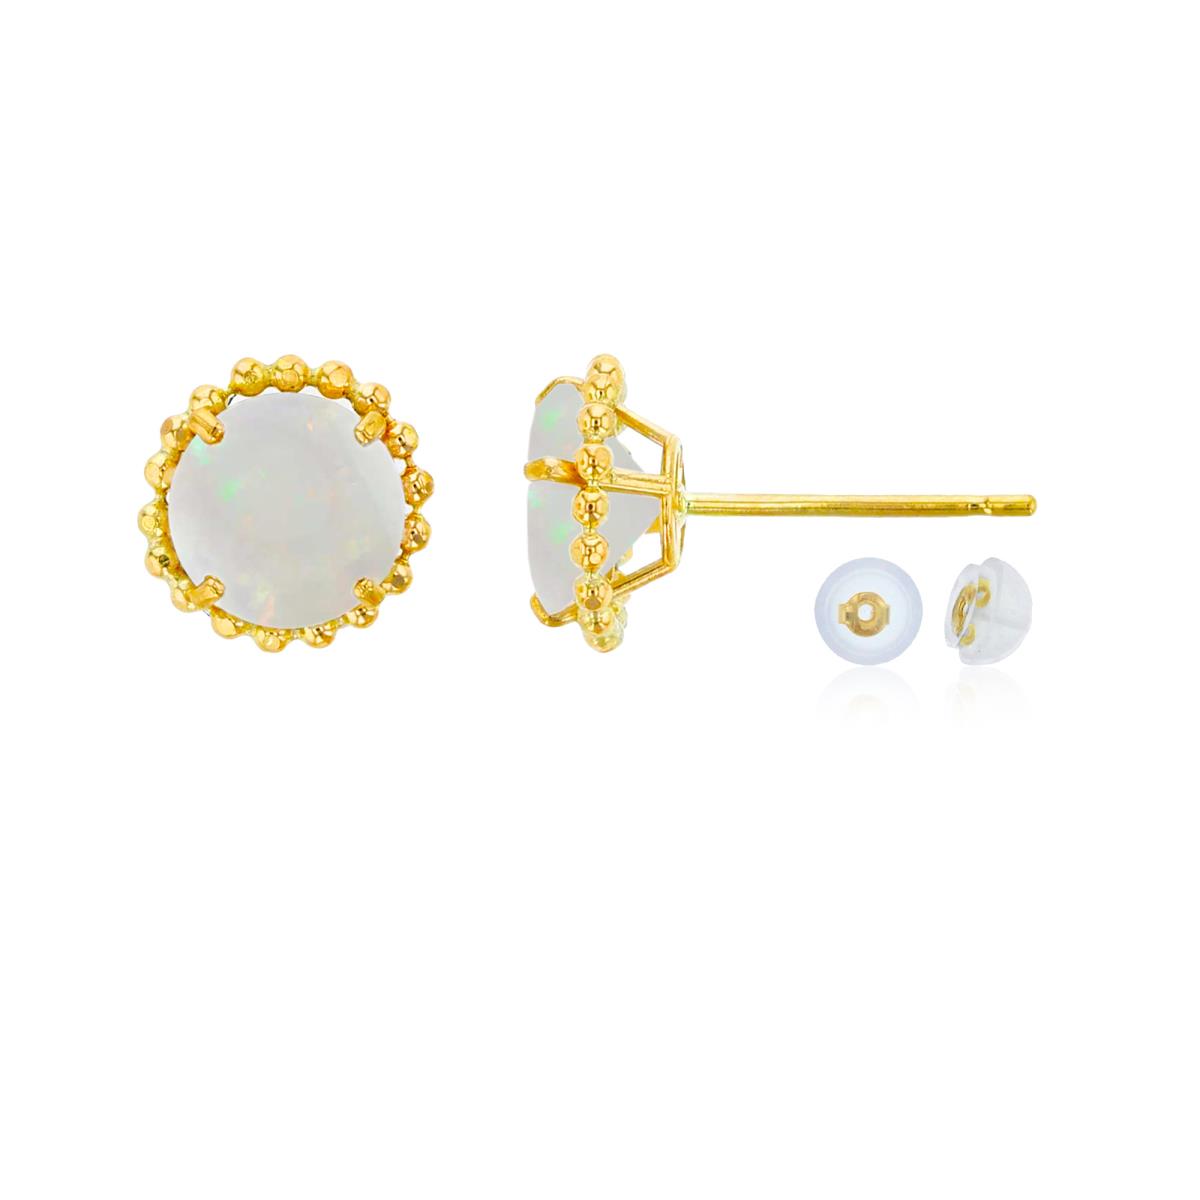 10K Yellow Gold 5mm Rd Opal with Bead Frame Stud Earring with Silicone Back